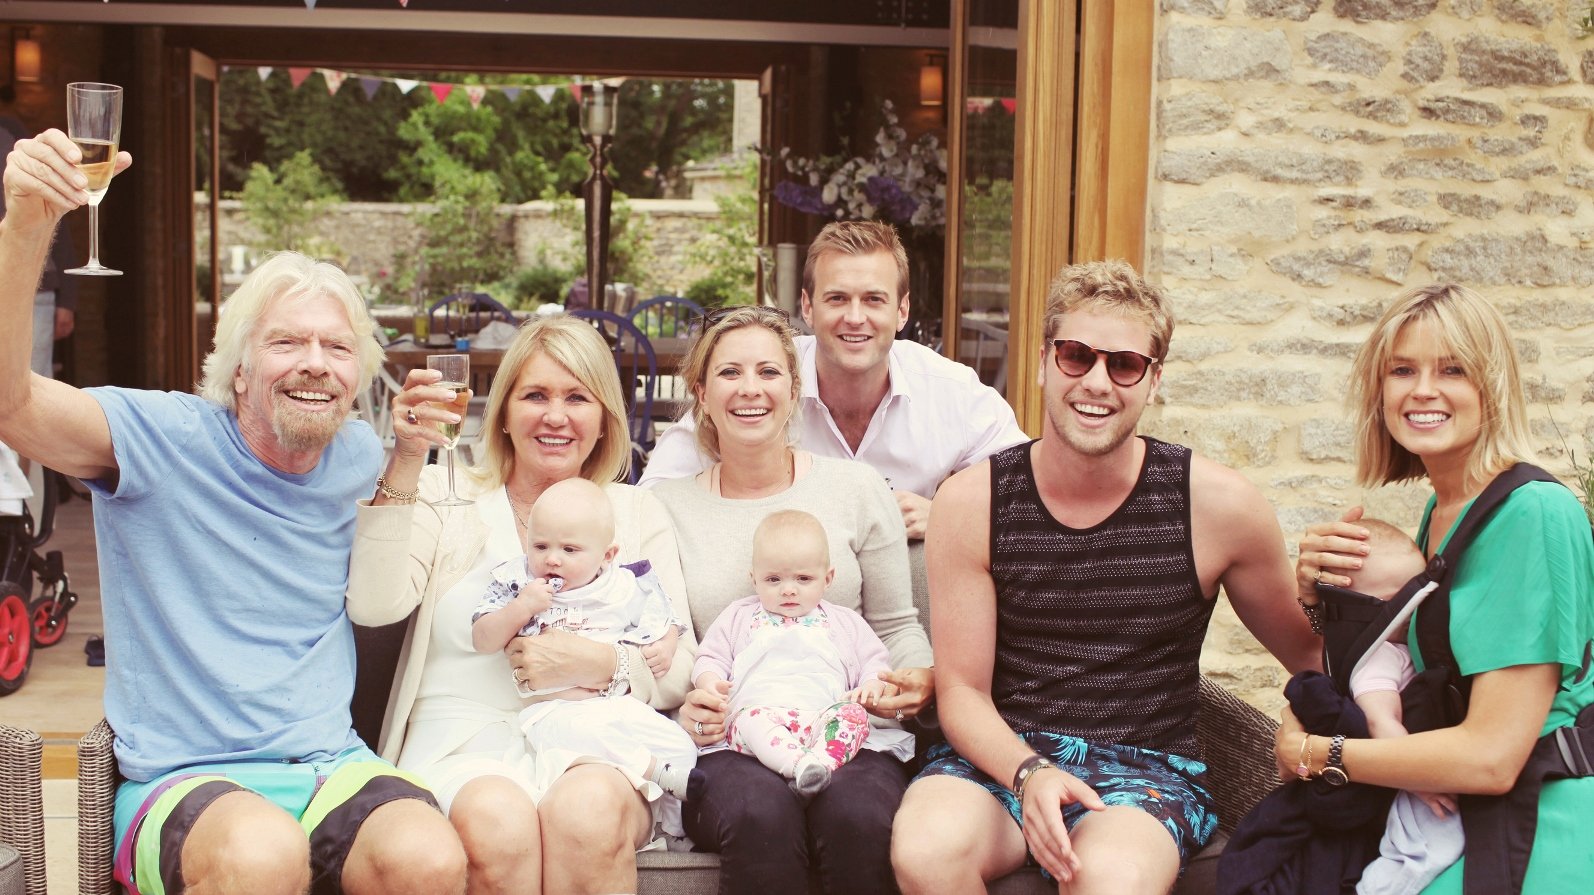 Branson ‘being’ happy with family. Photo Credit: Virgin.com